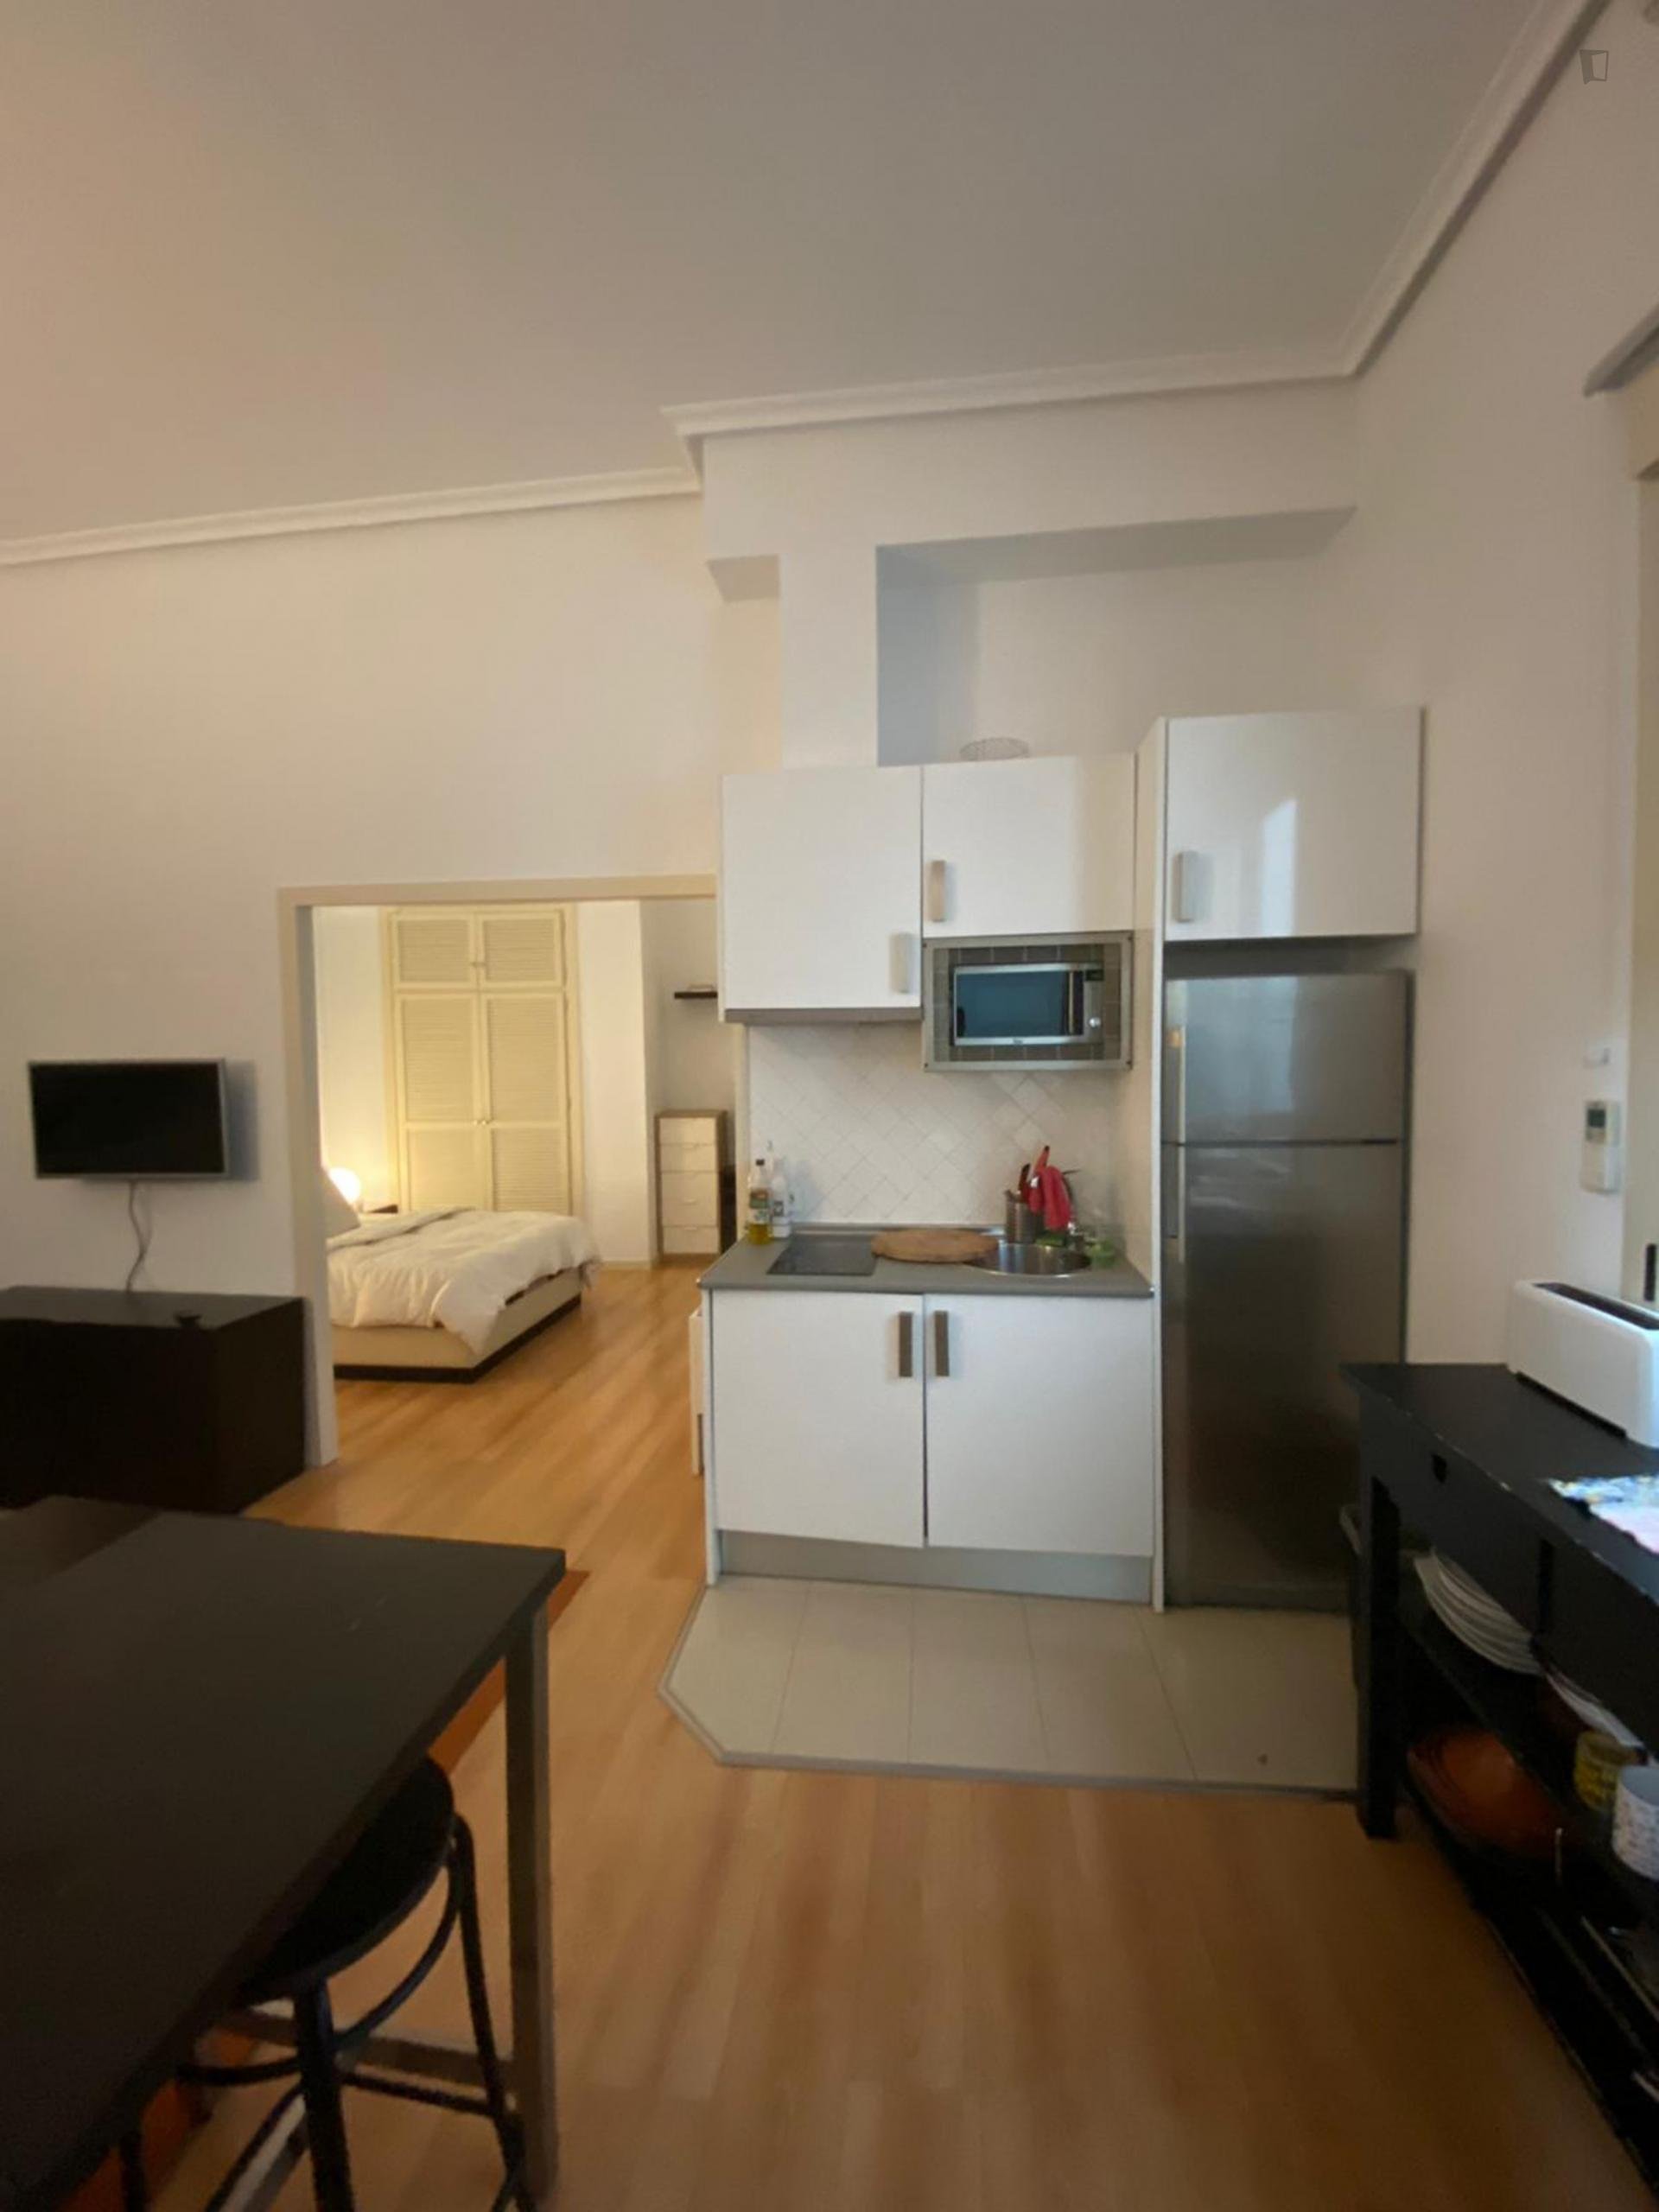 Atocha - Apartment in the center of Madrid